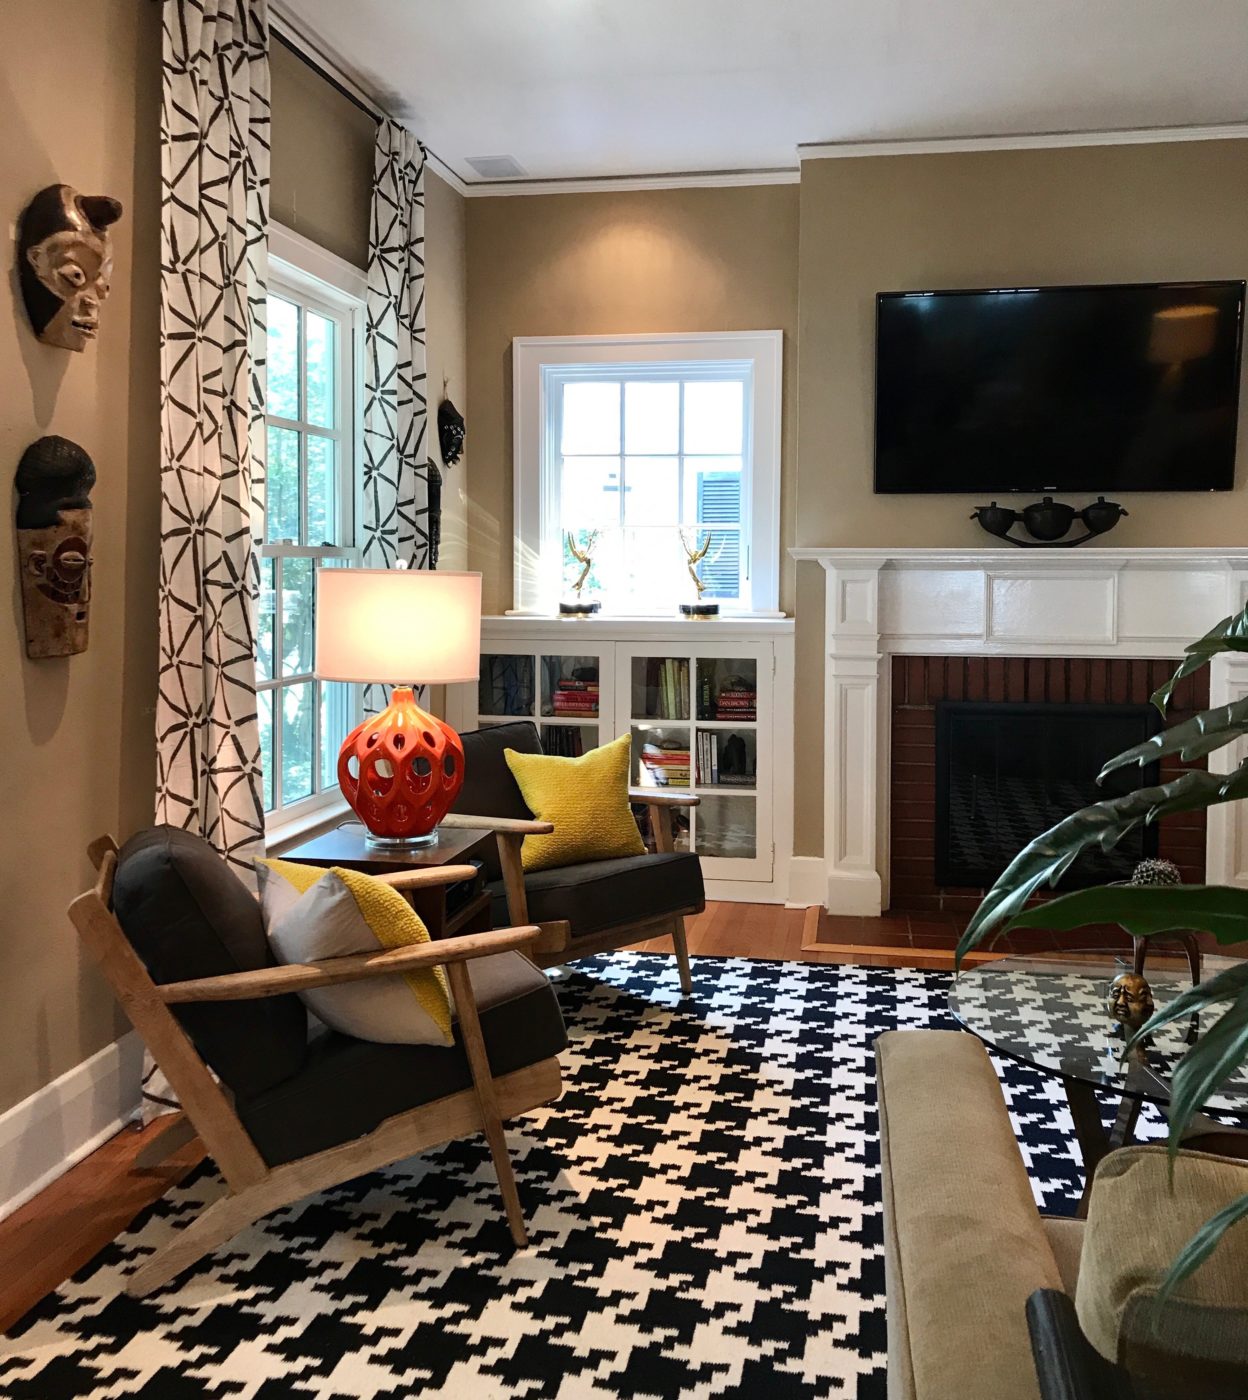 Mid-century modern lounge chairs sit atop a black and white hounds-tooth rug. Canary yellow pillows adorn chairs. Nestled in between chairs is a side table with a orange mid-century modern lamp. Displayed on the wall are masks from the homeowners collectibles.